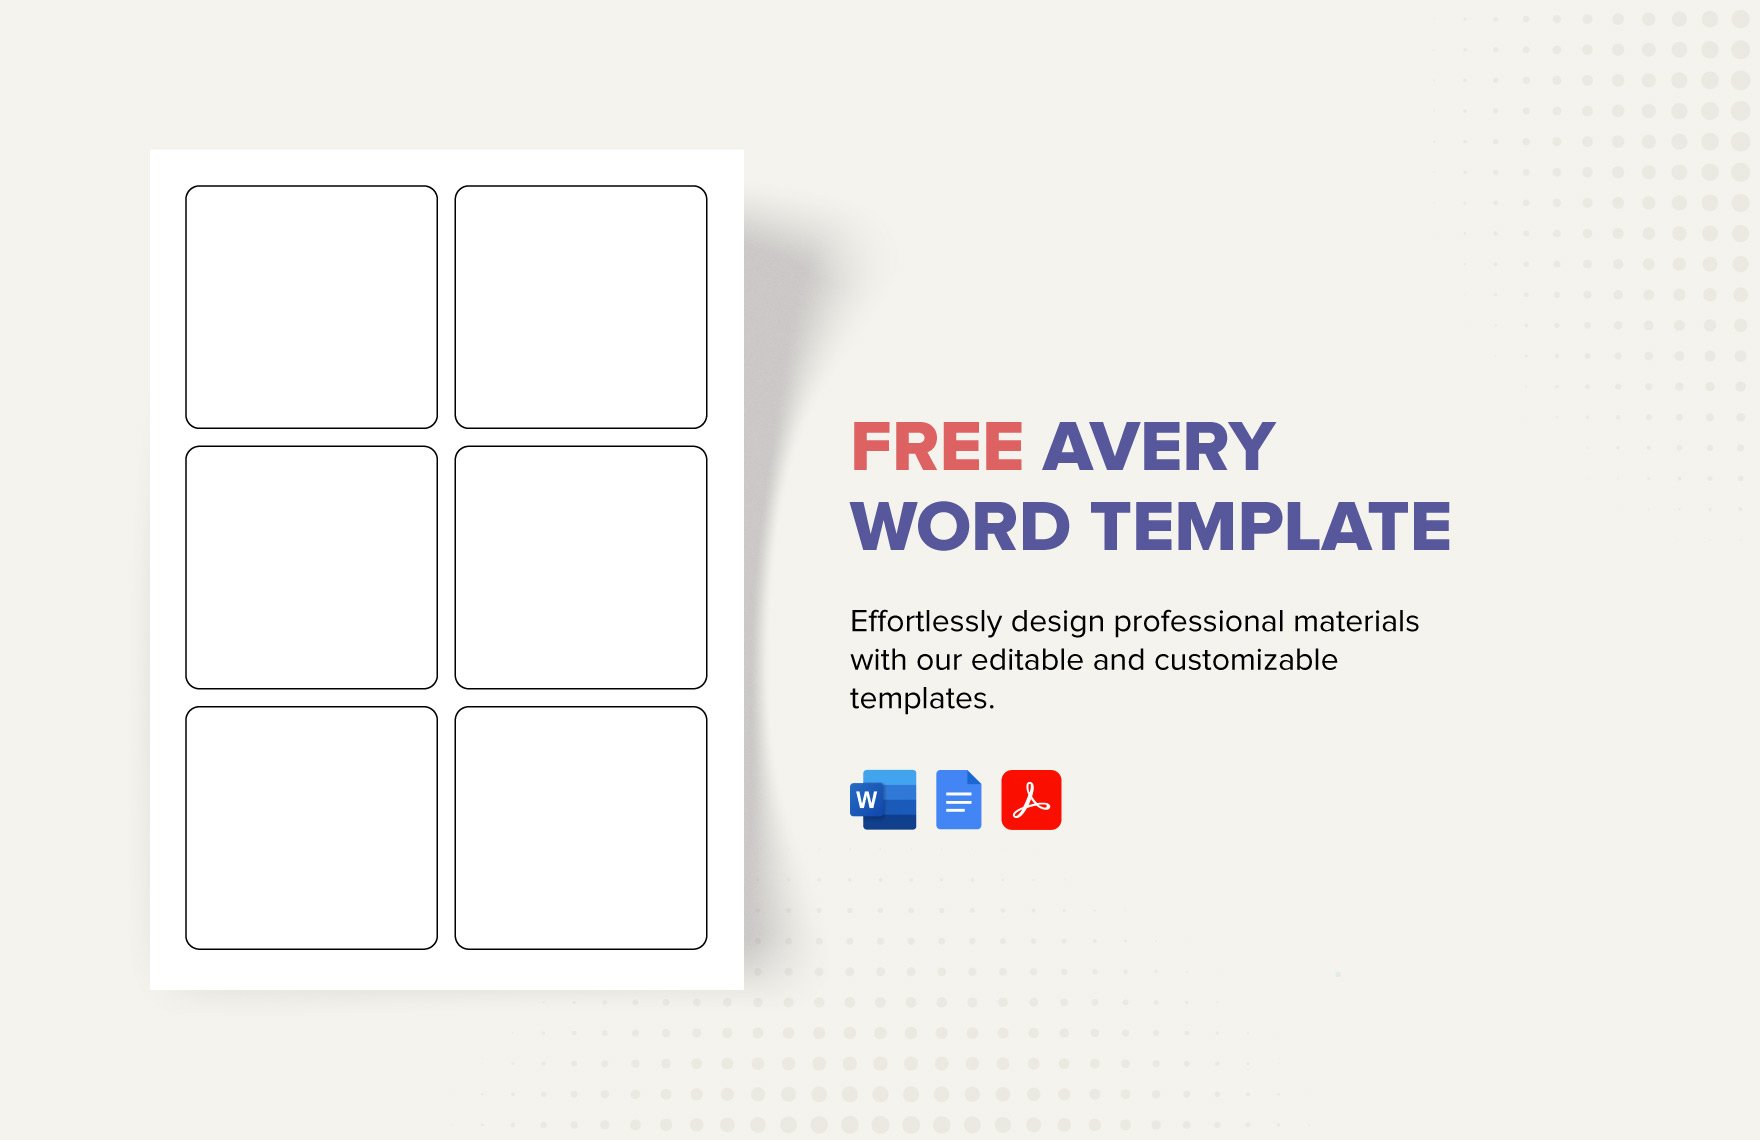 Avery Word Template